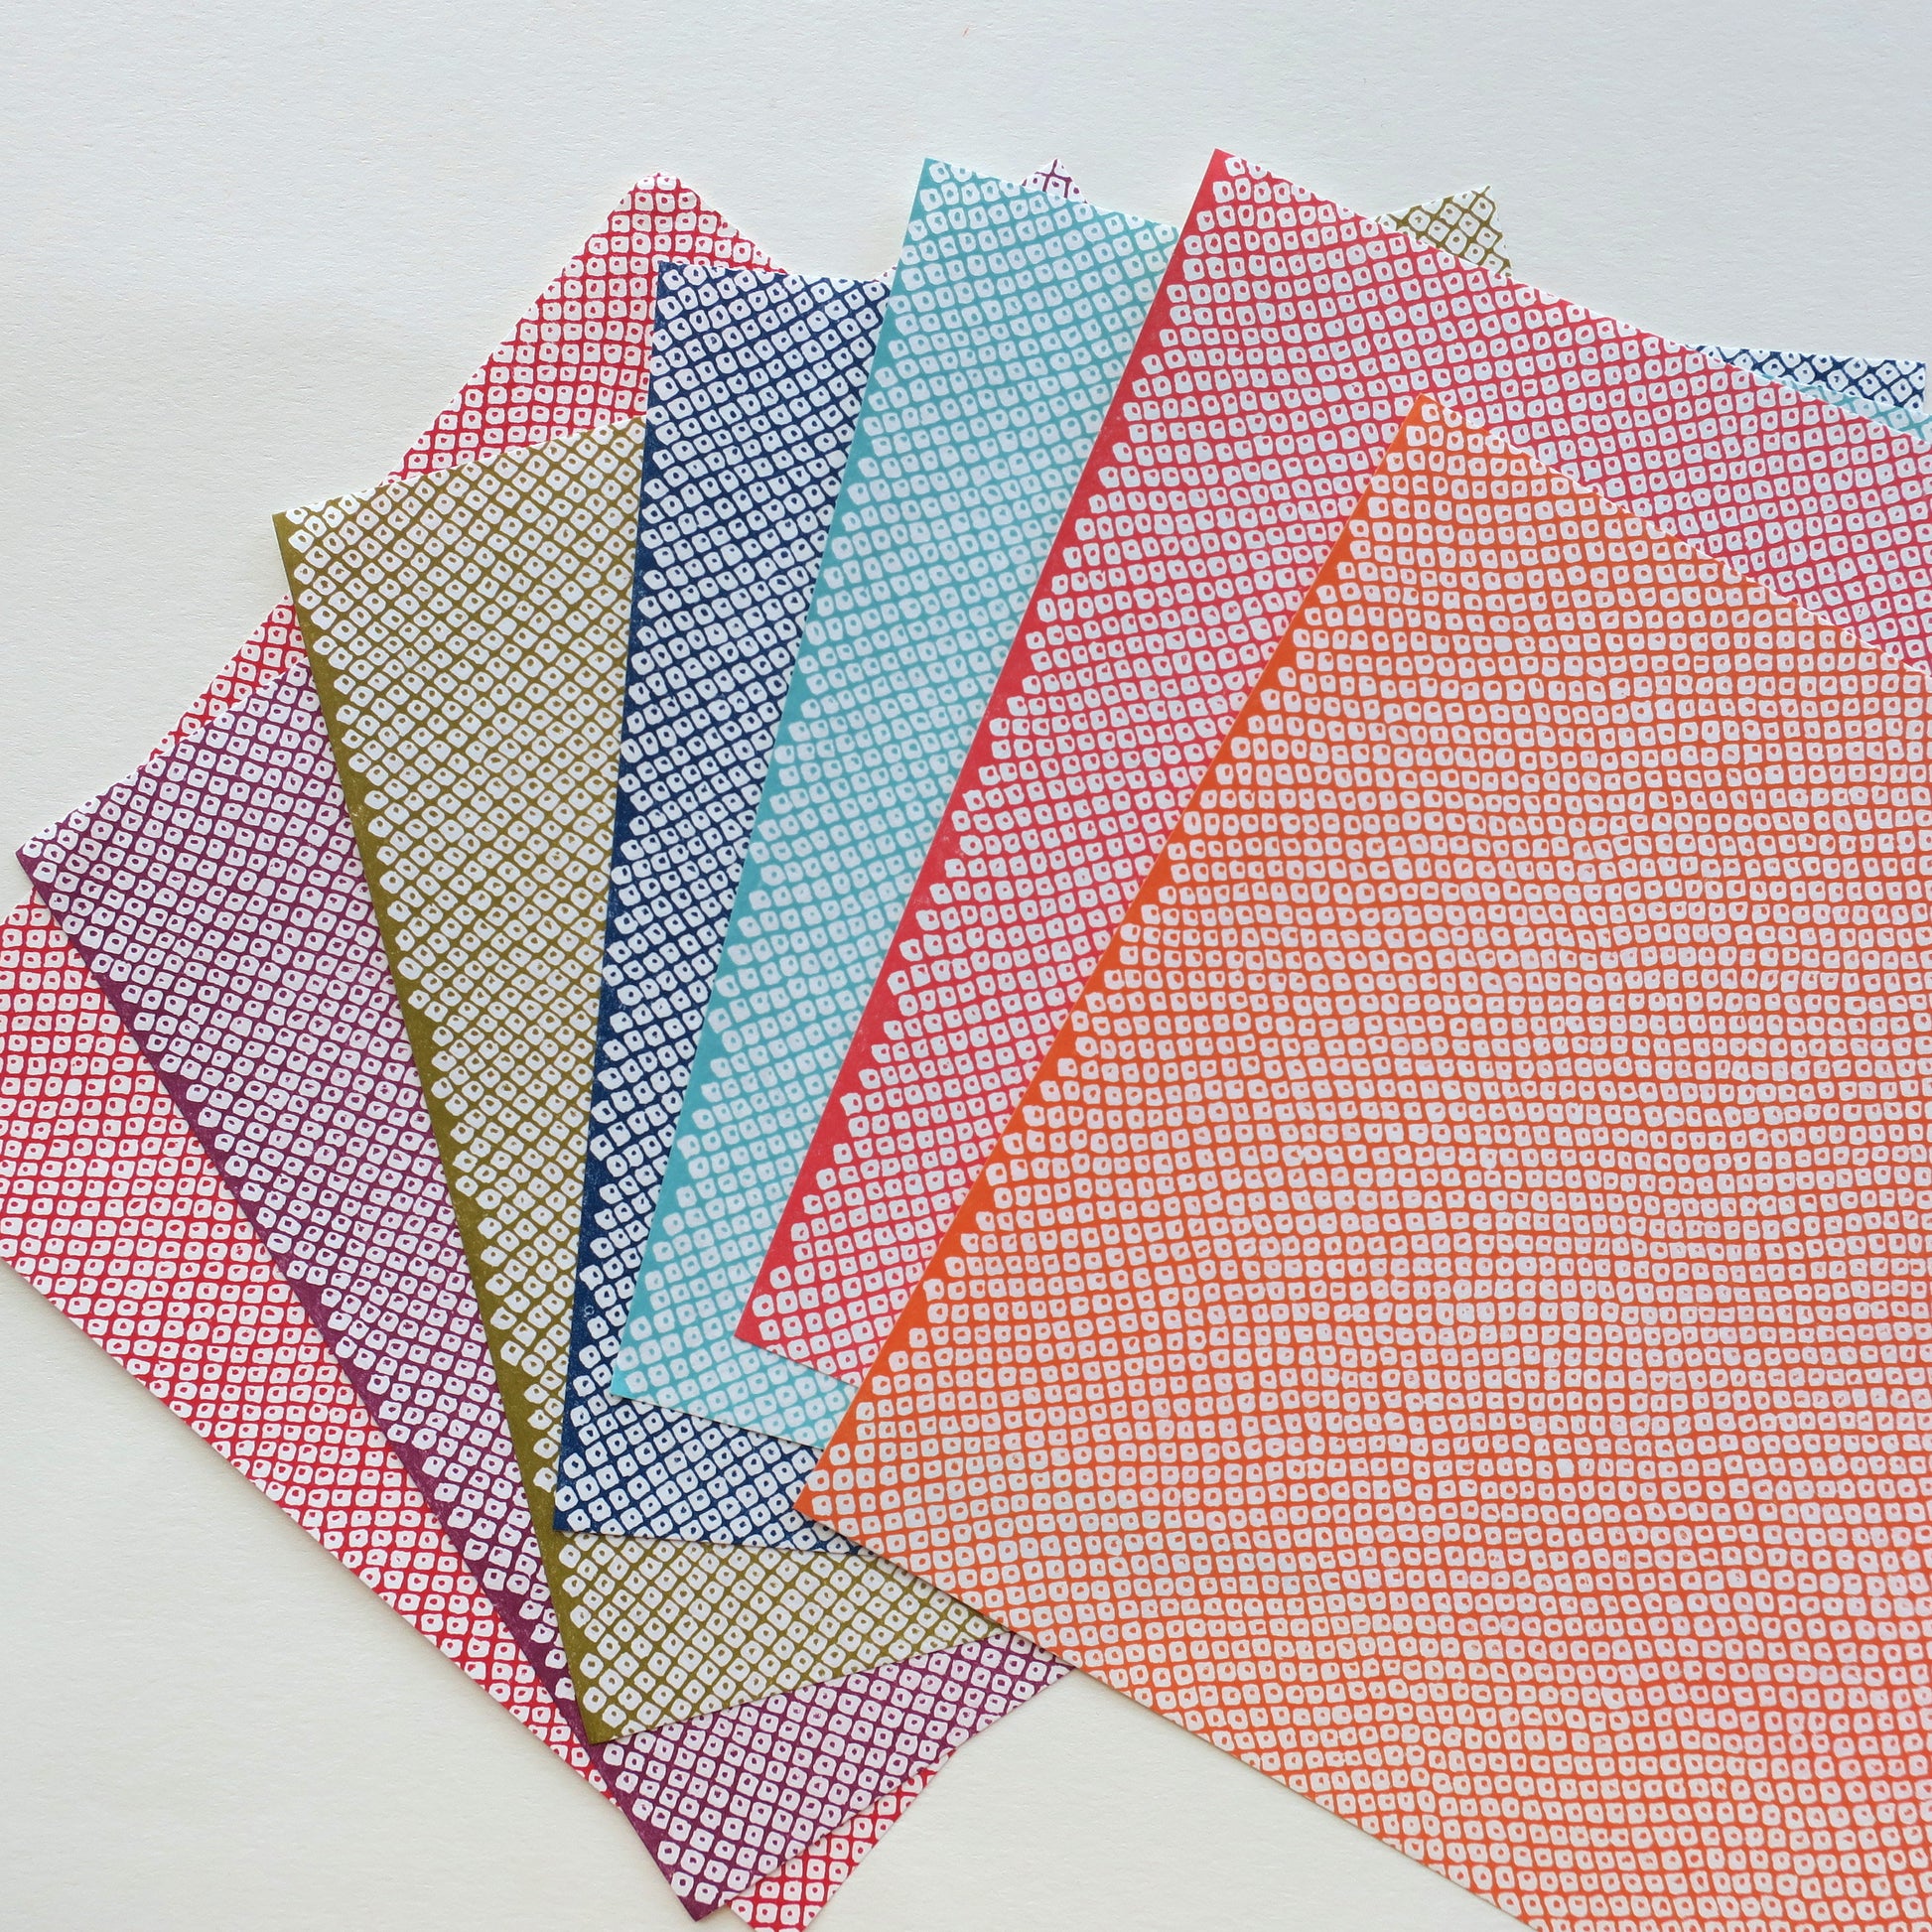 36 Sheets 17x17cm Washi Origami Paper - Mixed Patterns - washi paper - Lavender Home London